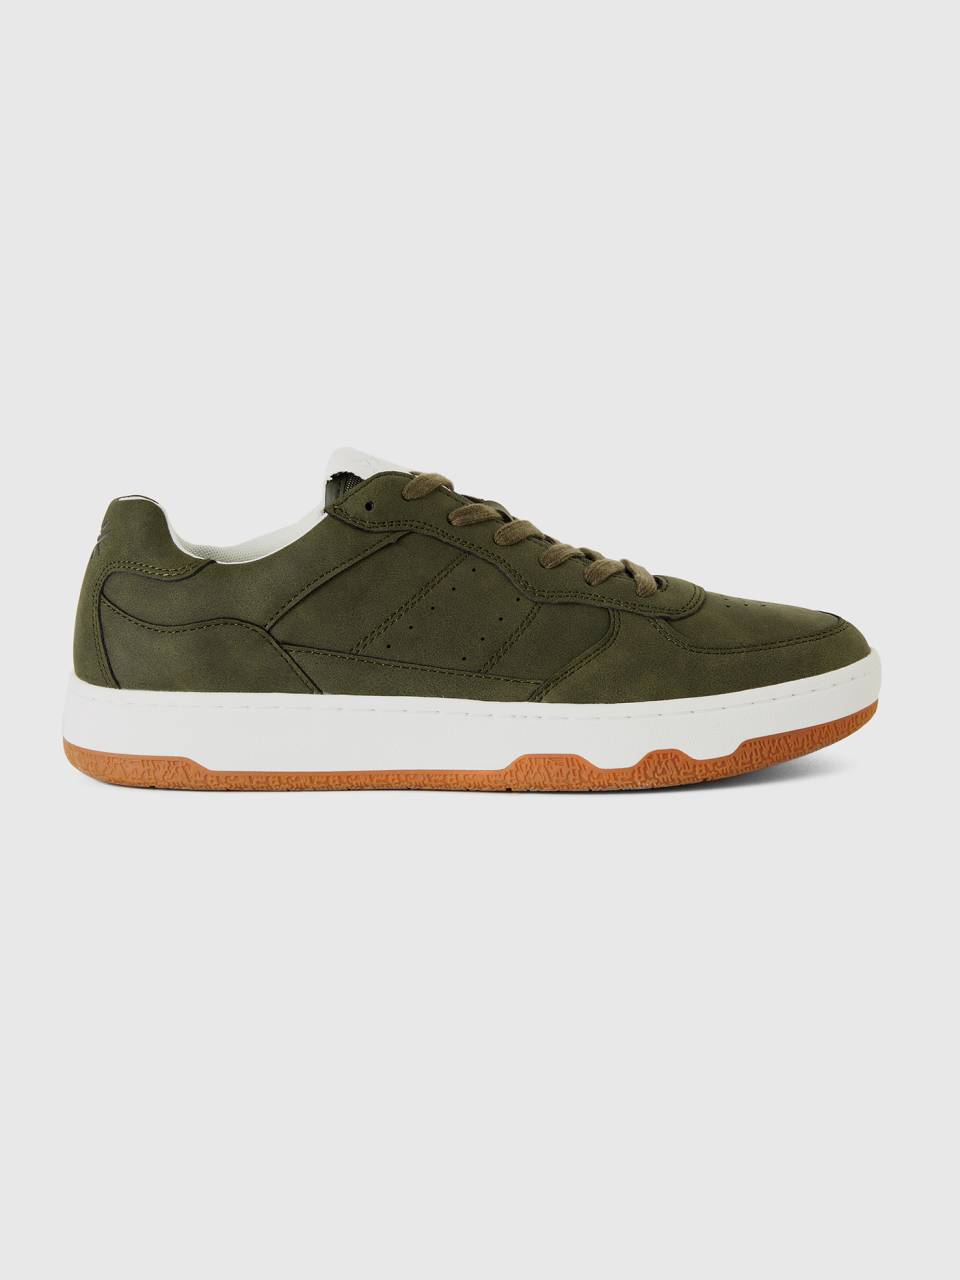 Benetton Military green low-top sneakers. 1